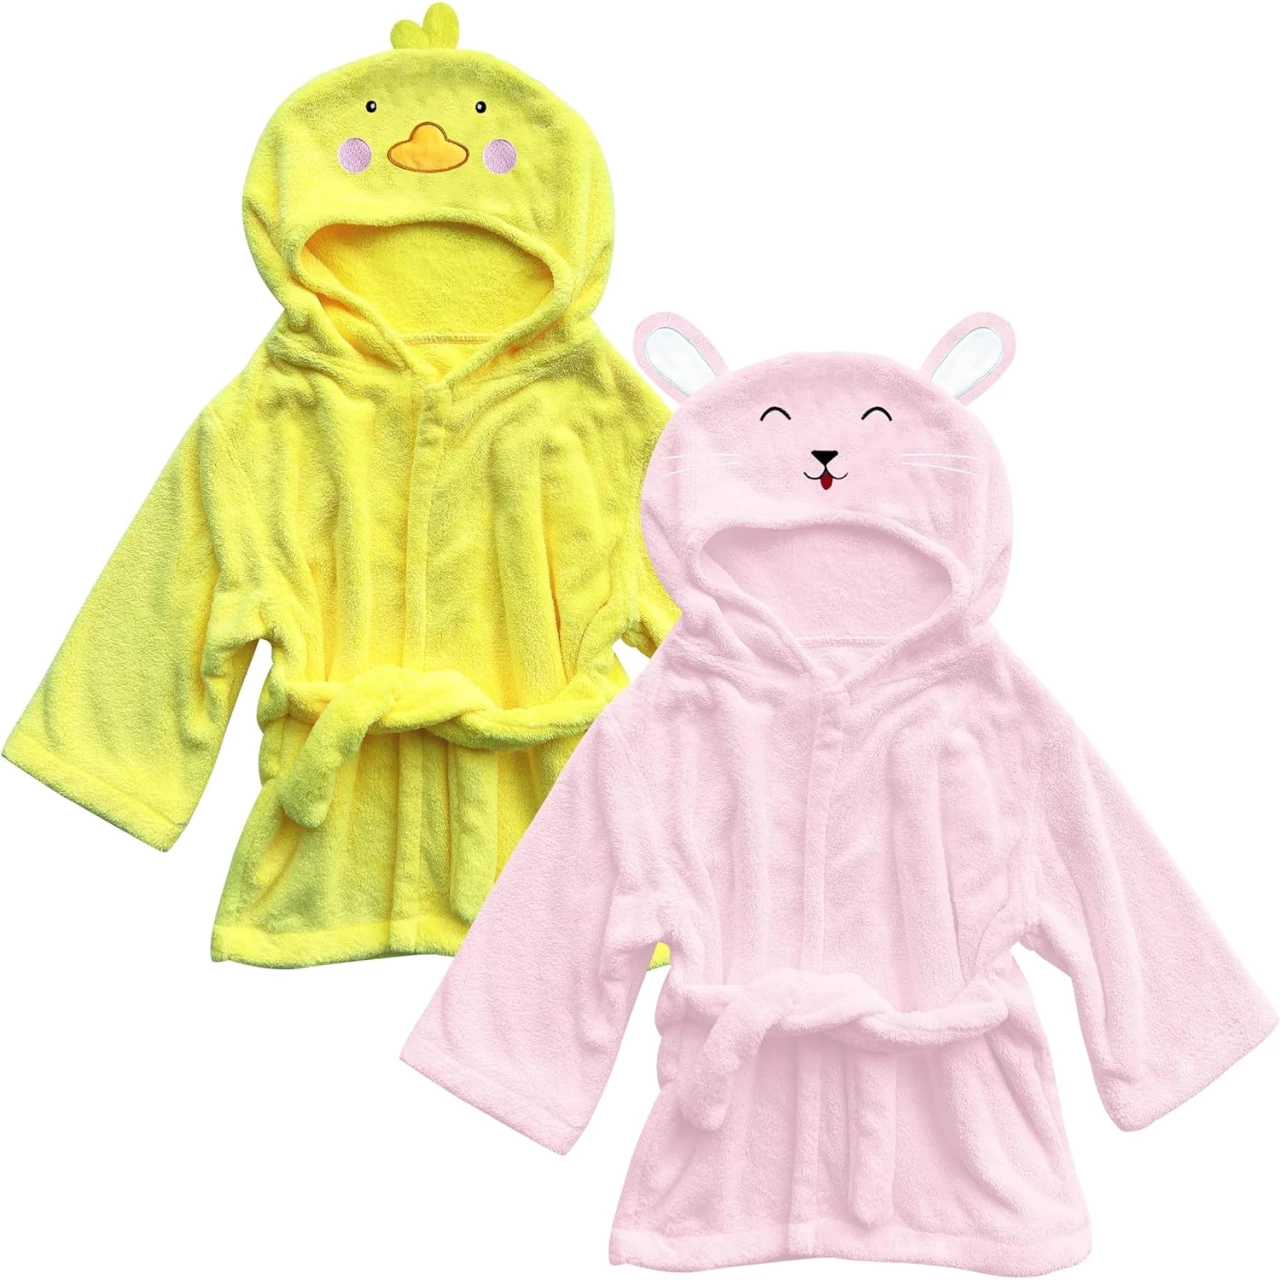 Sunny zzzZZ 2 Pack Unisex Baby Plush Animal Face Robe for 0-9 Months - Neutral Design Softest Newborn Clothes for Boys and Girls - Baby Essentials Registry Search Gifts - Duck and Pink Rabbit